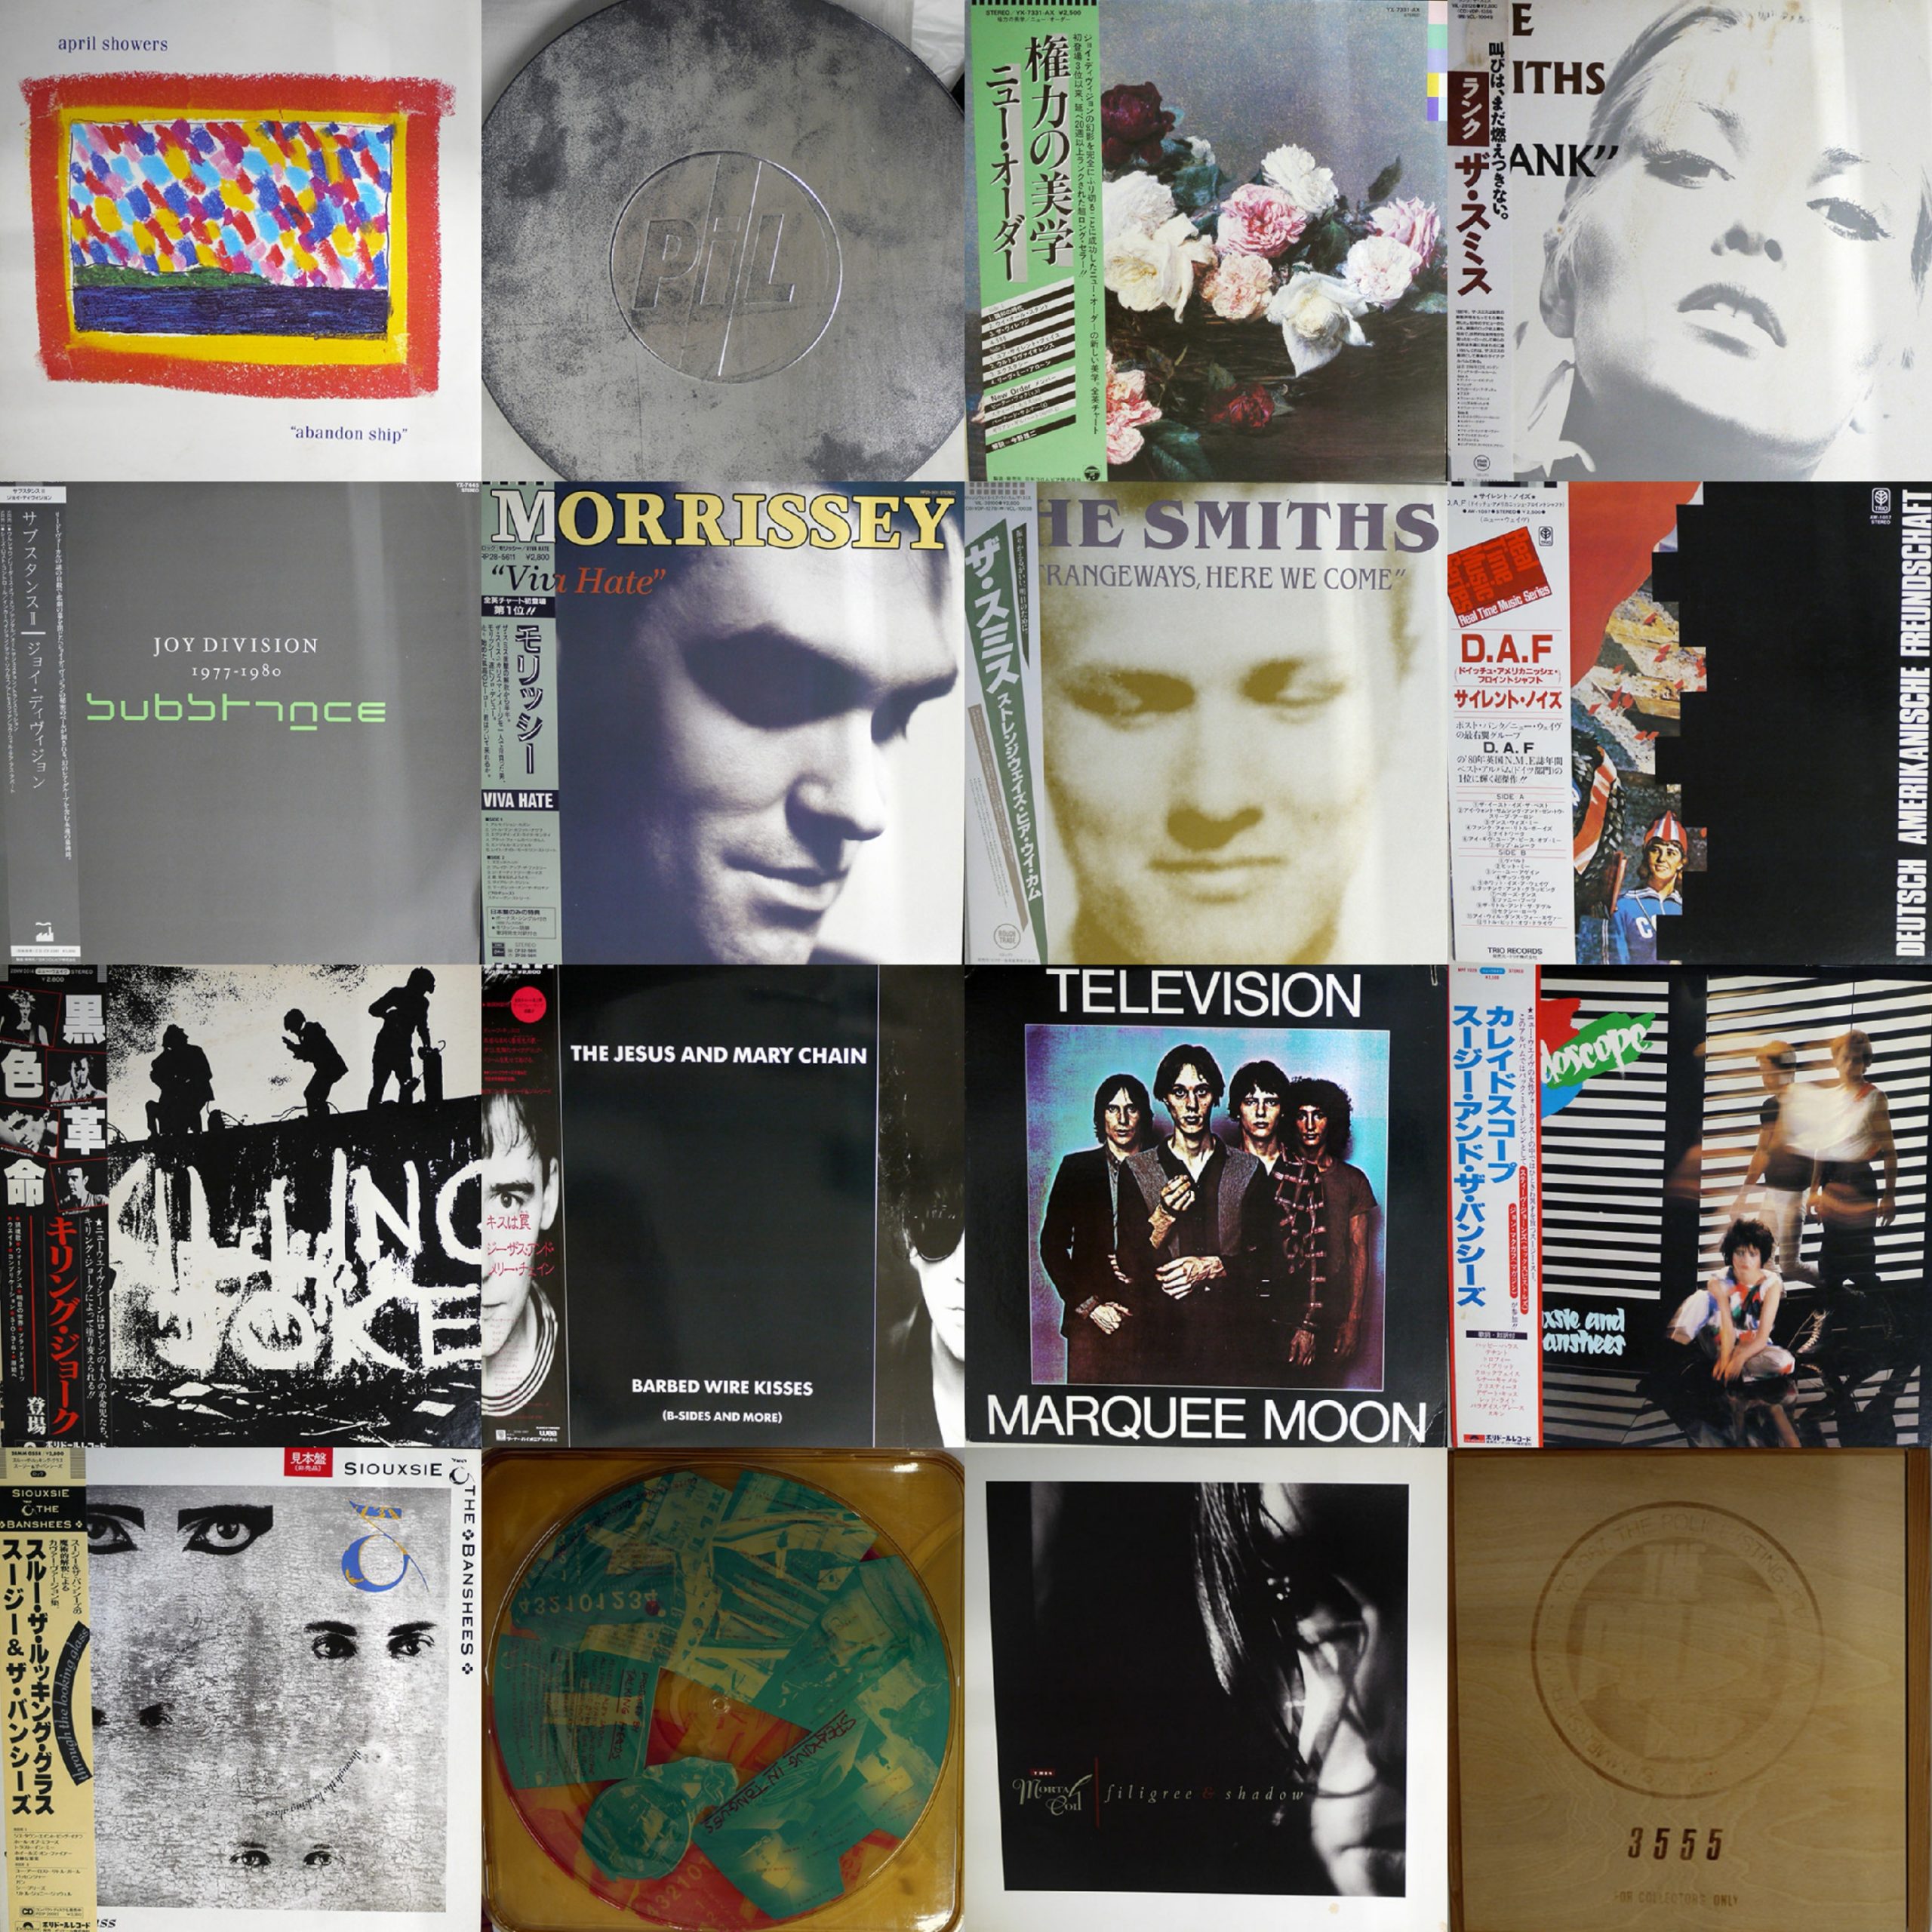 2022/09/14 (WED) NEW WAVE LP SALE – General Record Store